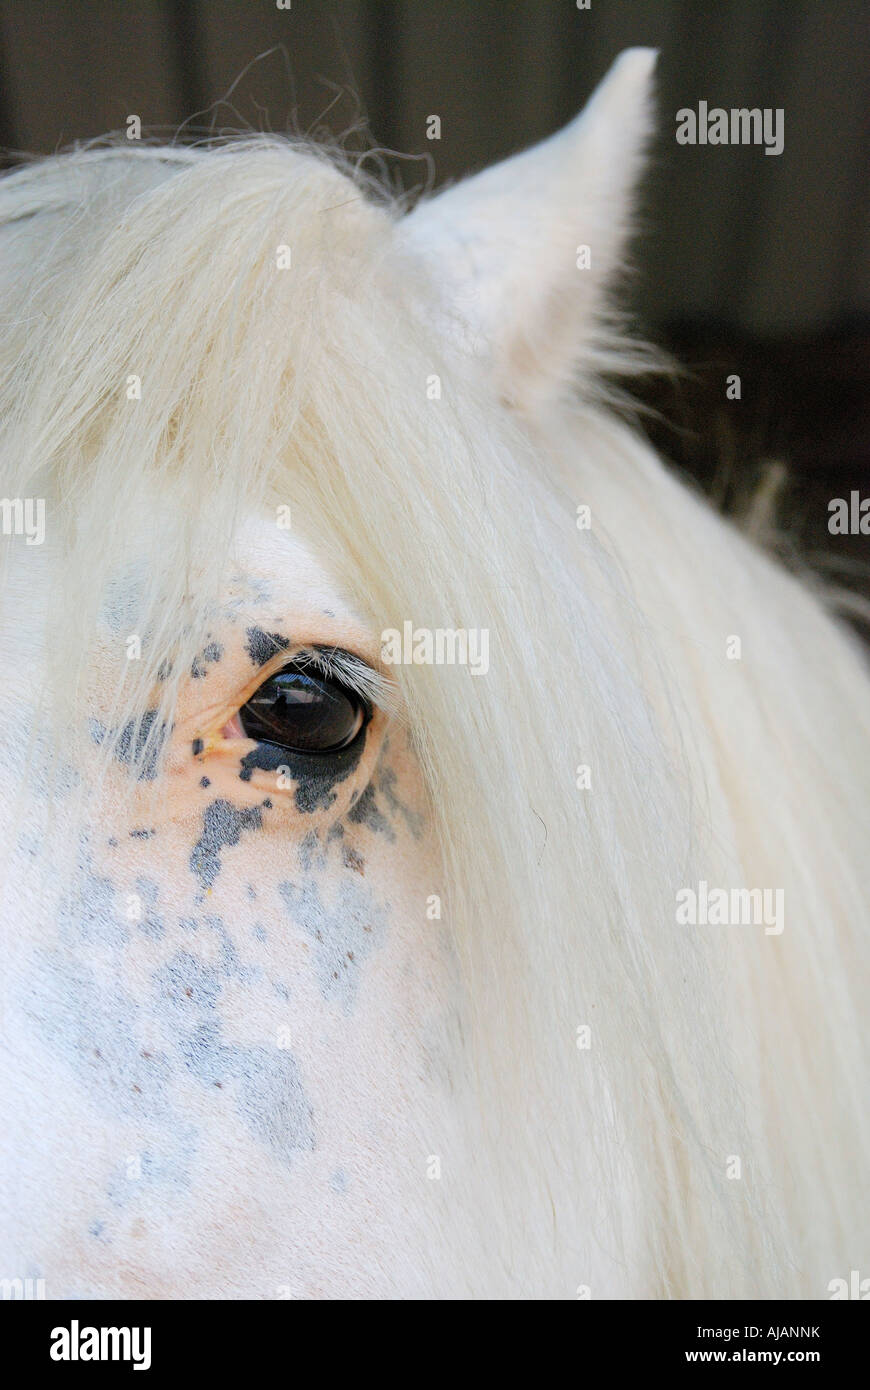 Close up facial image of a pure white horse with very pink skin showing around its eye Stock Photo